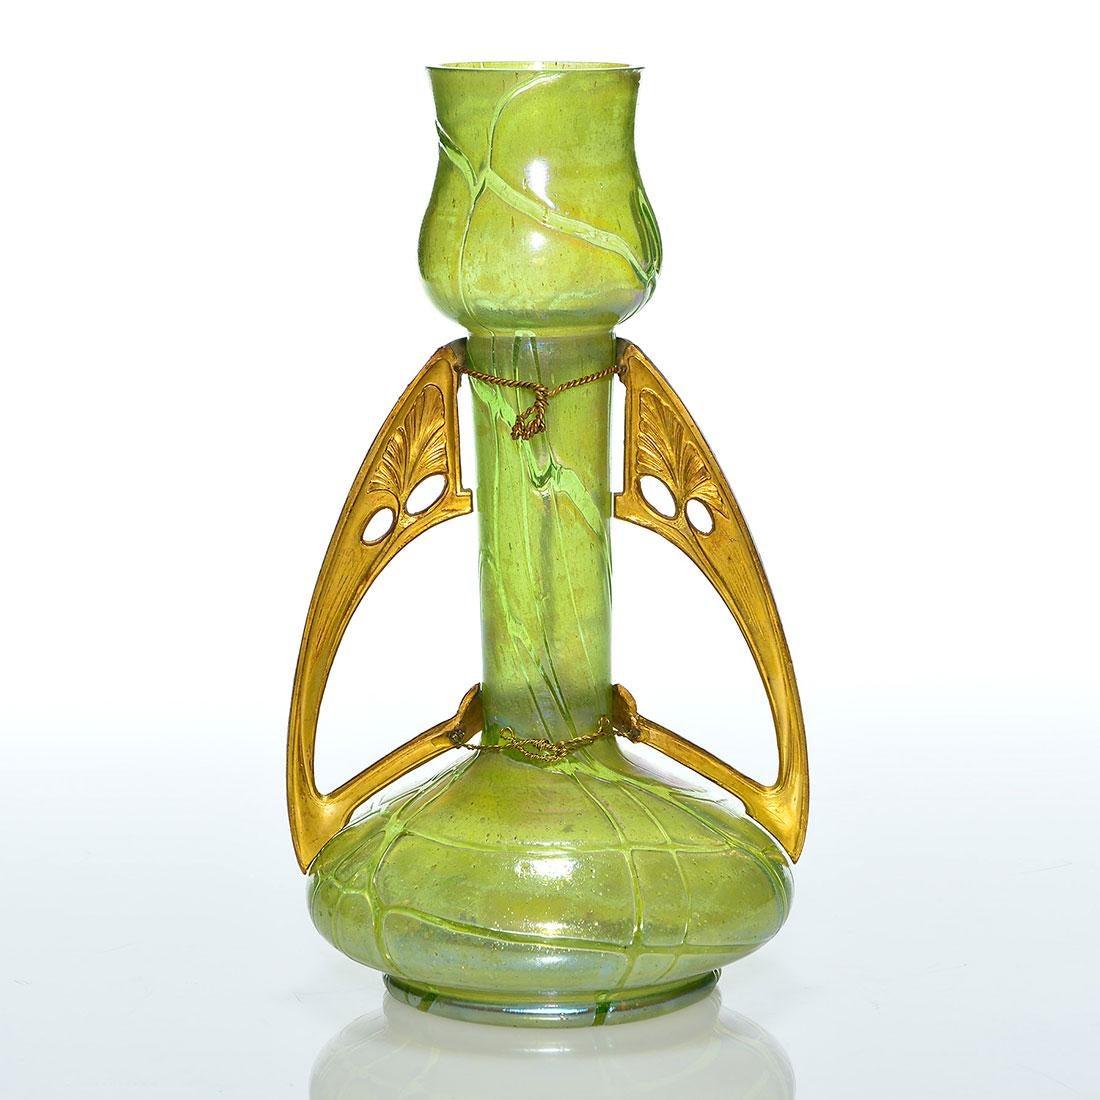 A Loetz-style Art Nouveau glass vase with a gilt metal mount dating circa 1900. The design from Kralik Glassworks (Wilhelm Kralik Söhn) features a flaring tulip shaped top over a slender neck of pale, sage green glass with metallic shades of gold,